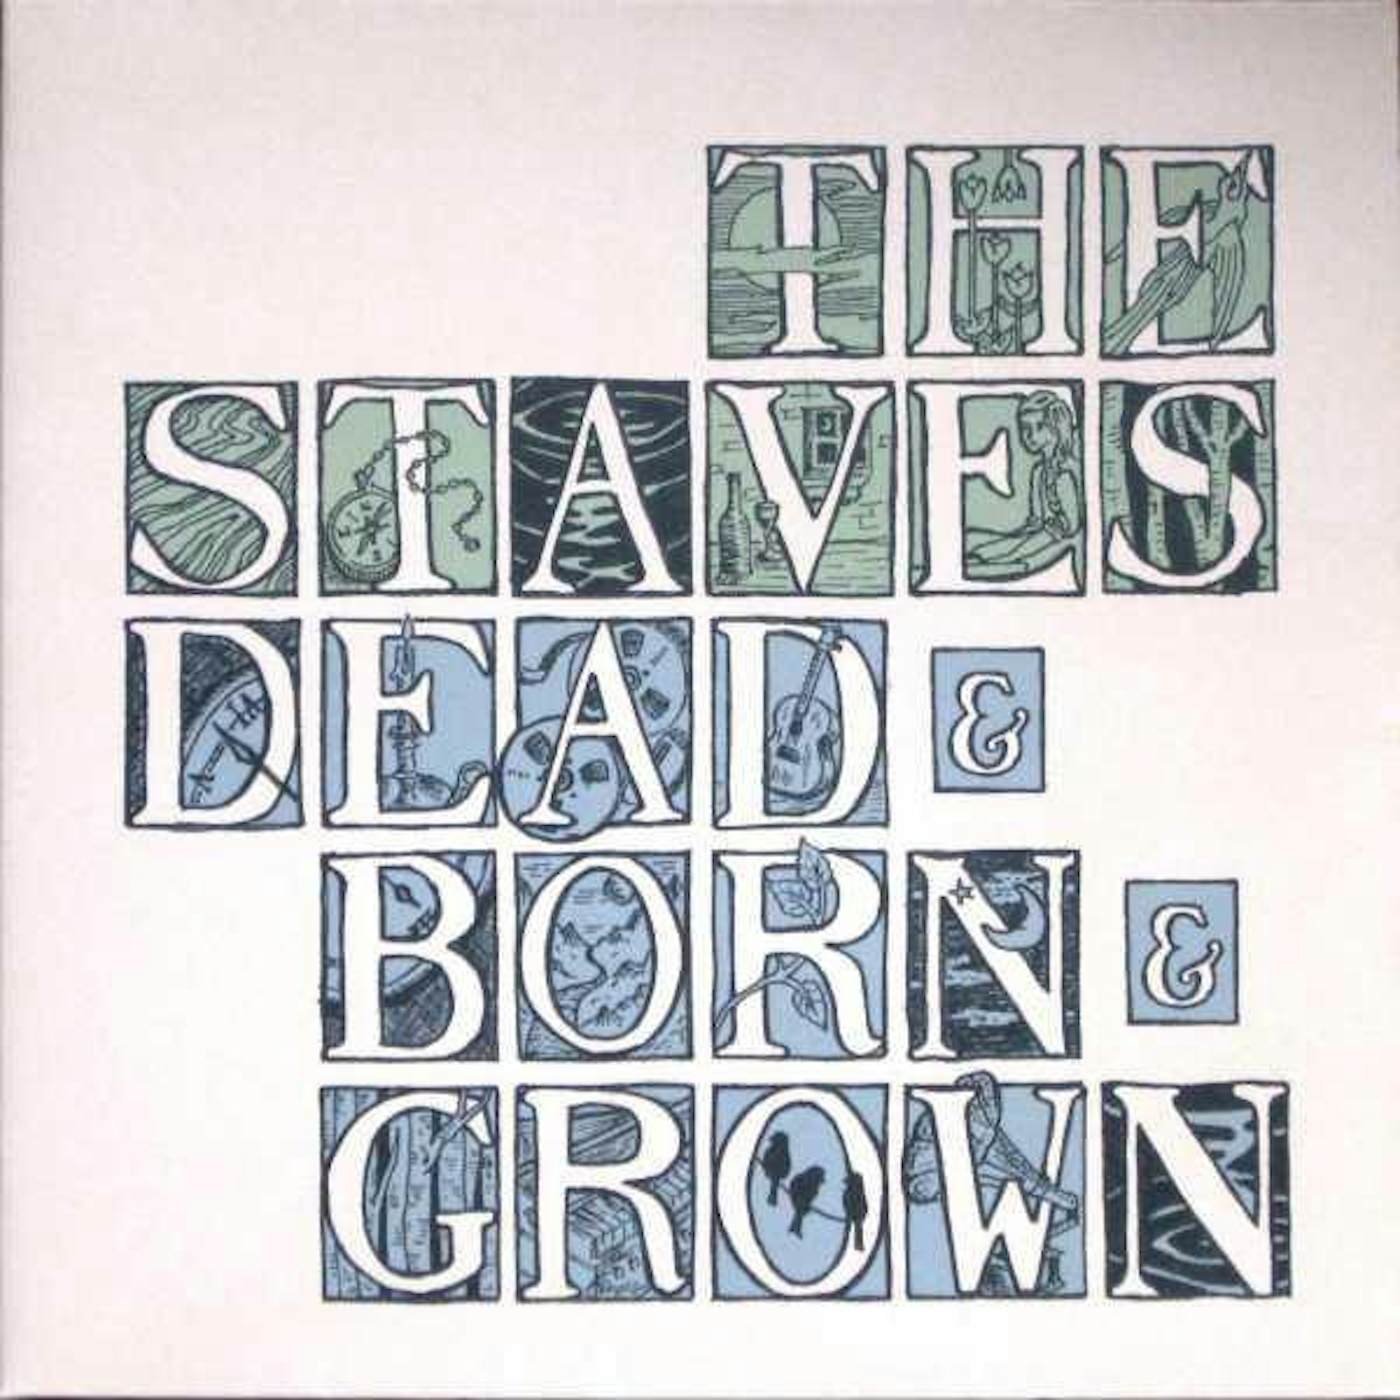 The Staves DEAD & BORN & GROWN (10TH ANNIVERSARY/RECYCLED VINYL) Vinyl Record